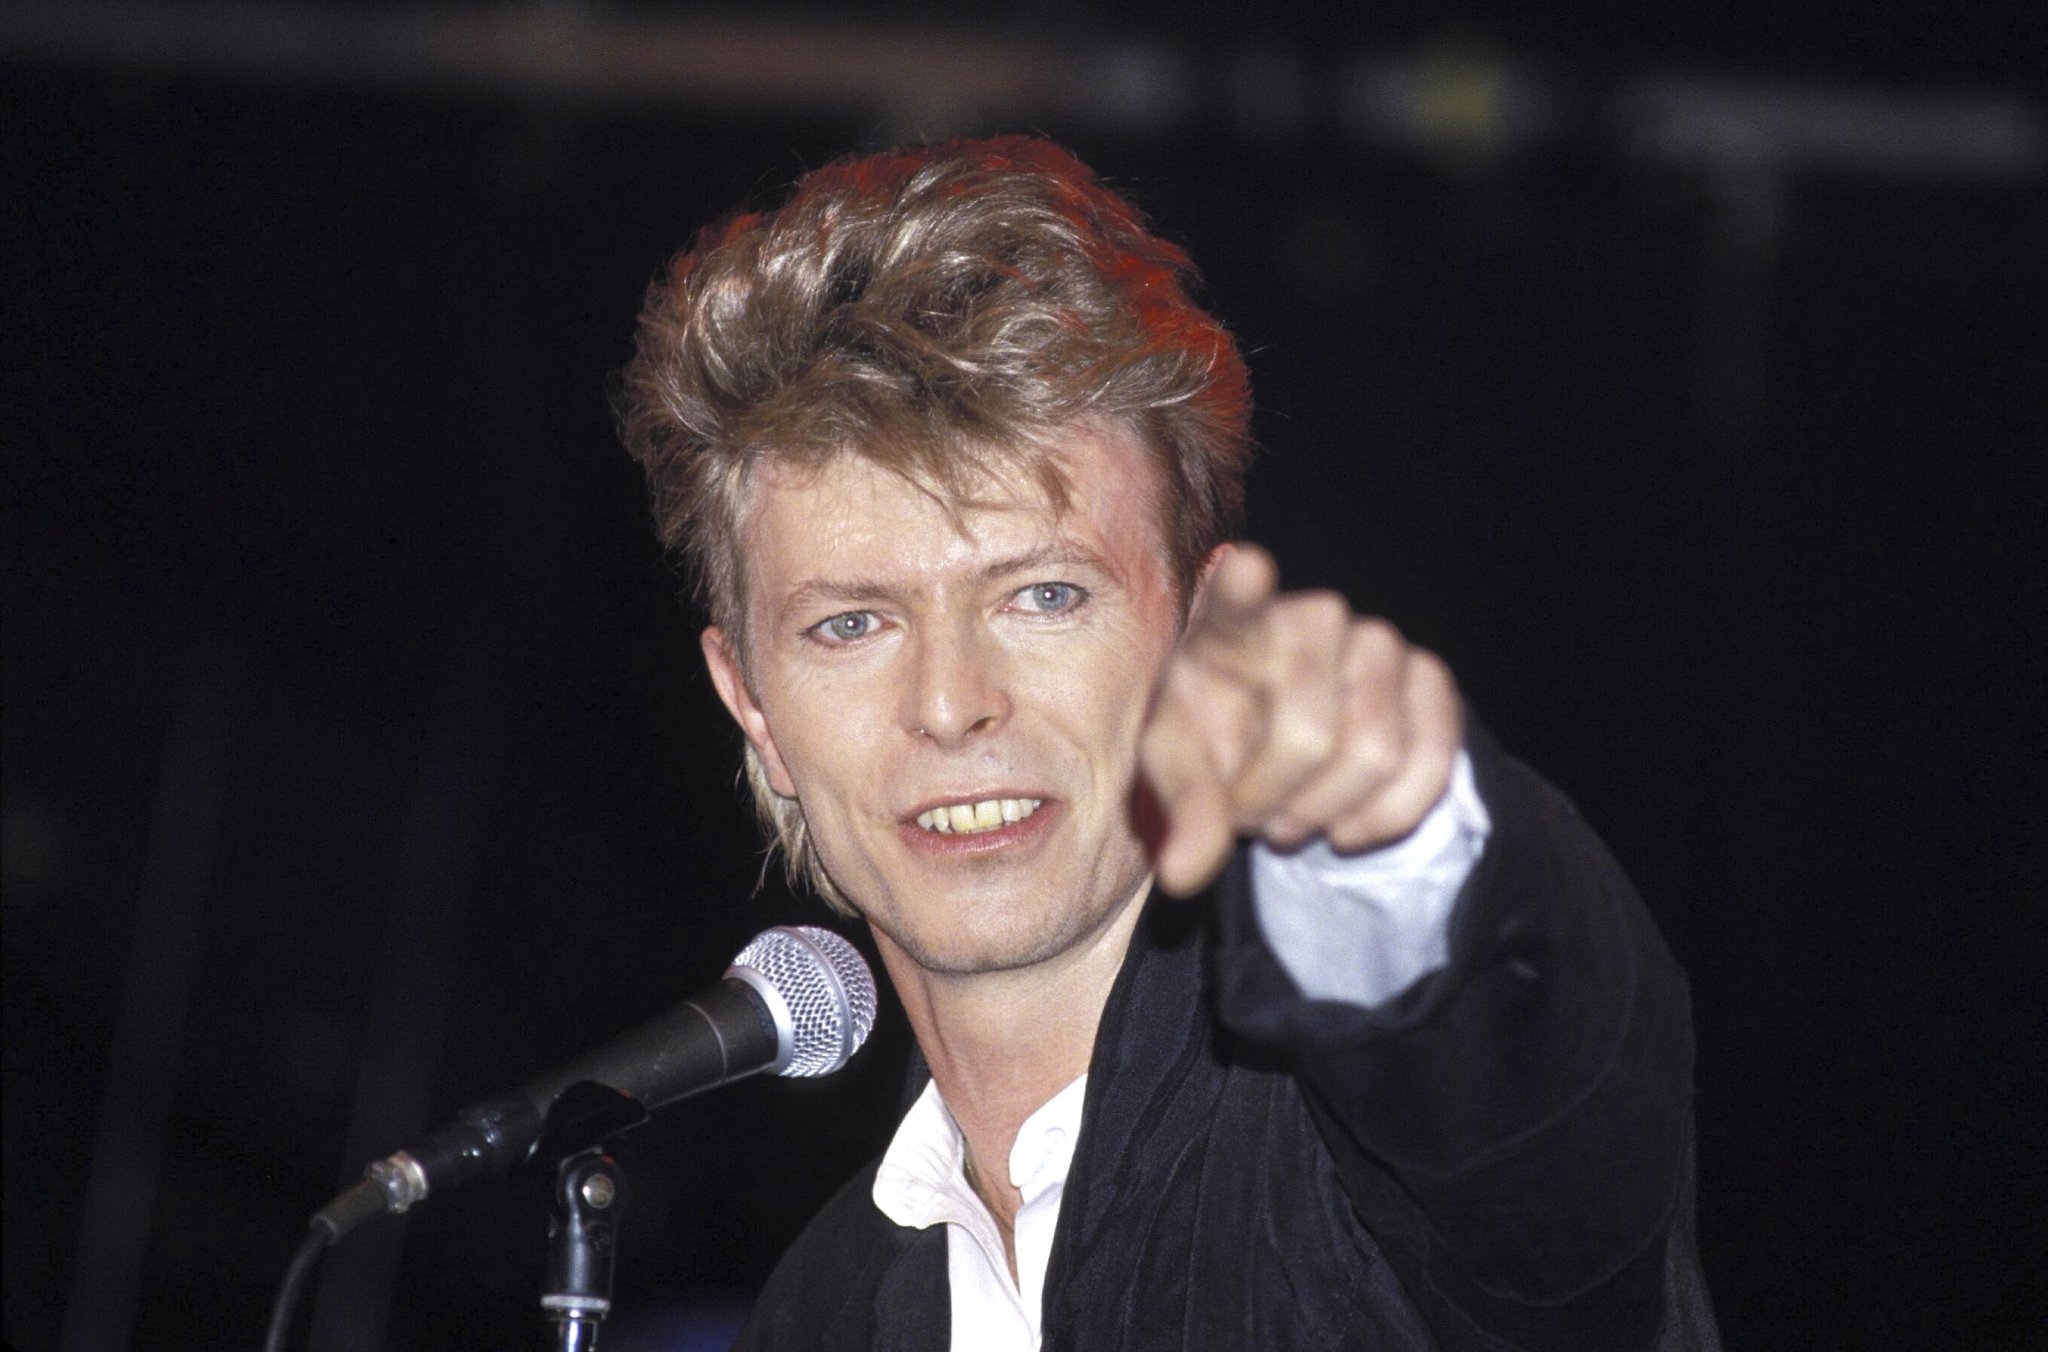 Did David Bowie Say This in 1999 About the Internet?